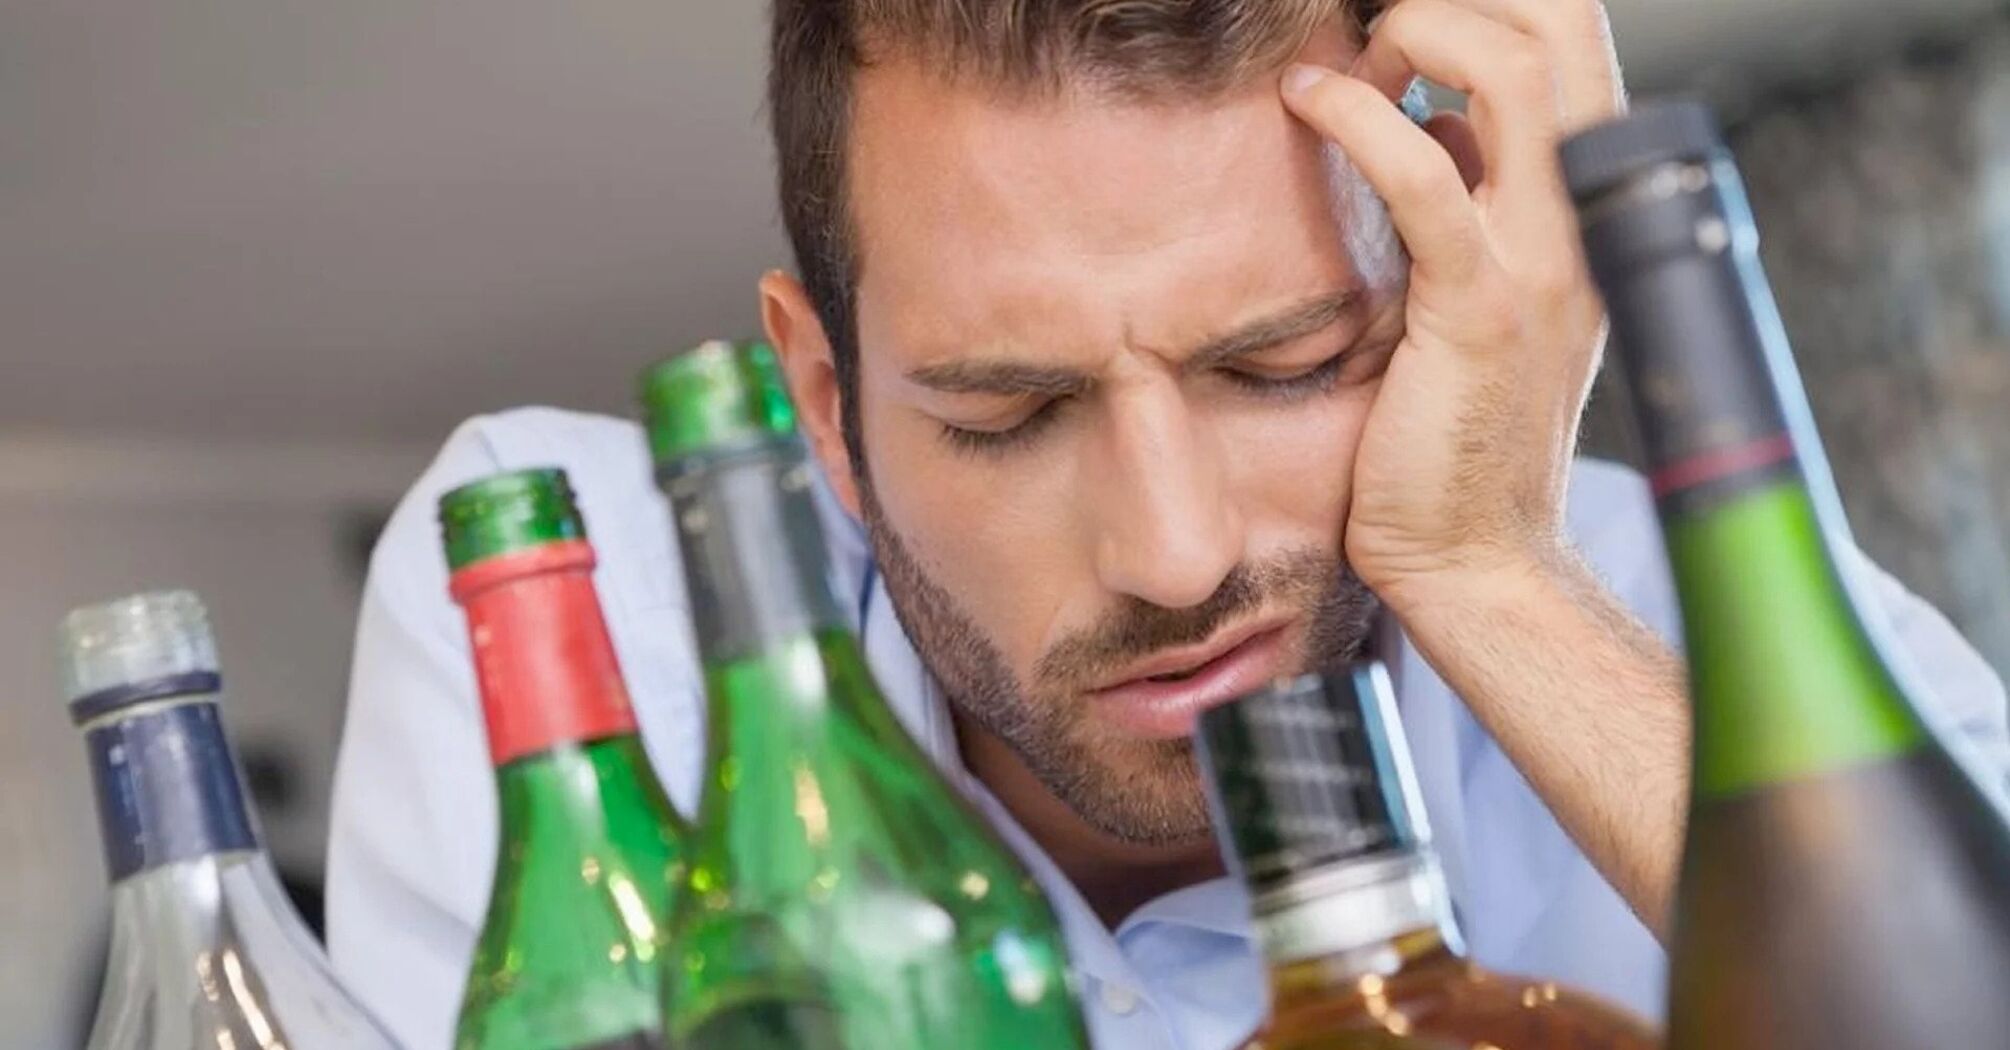 How to drink alcohol correctly to avoid a hangover